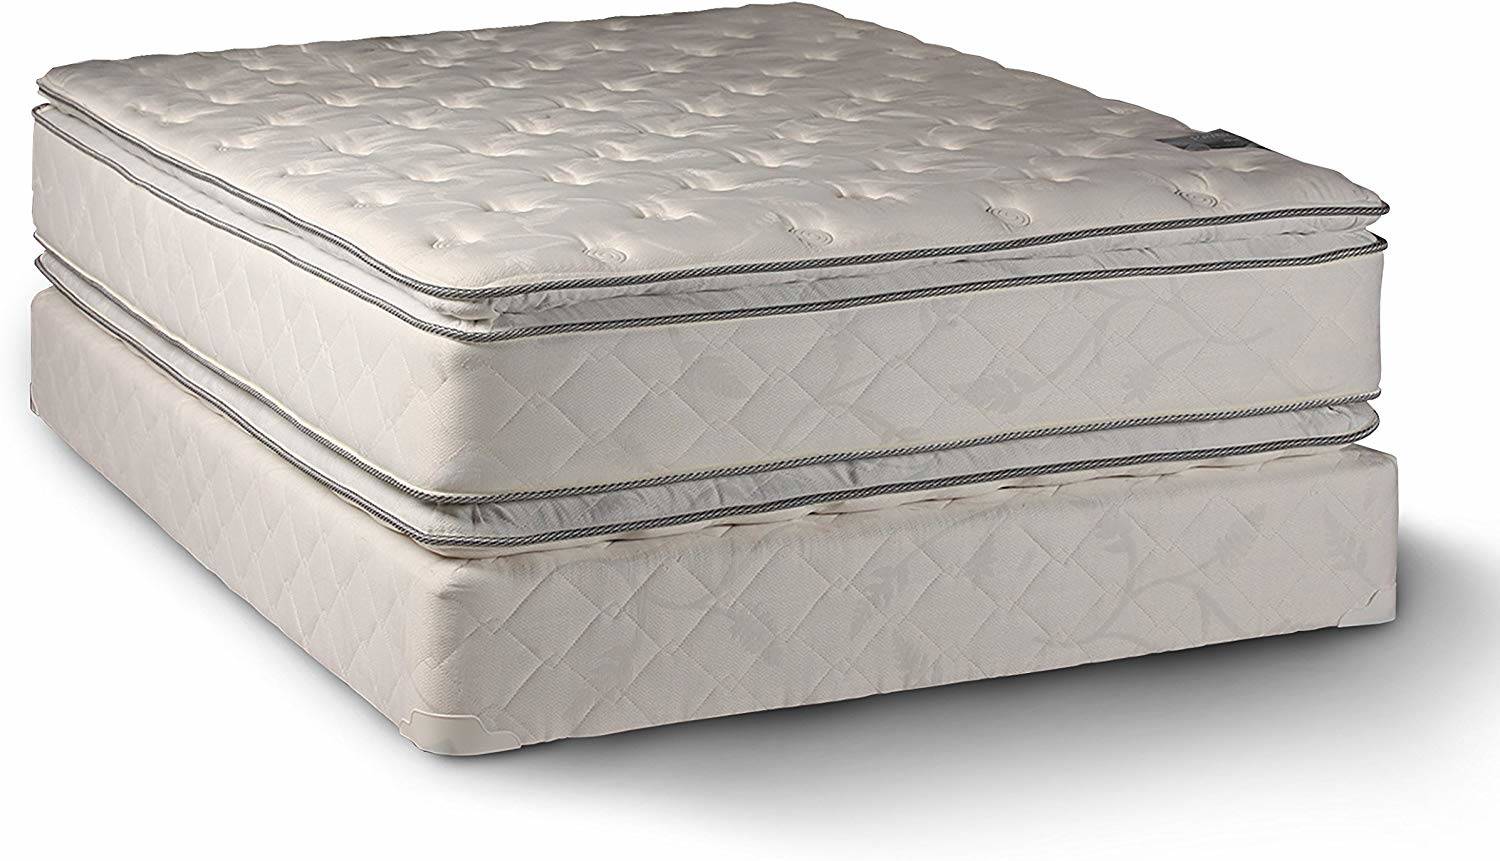 double sided pillow top mattress king